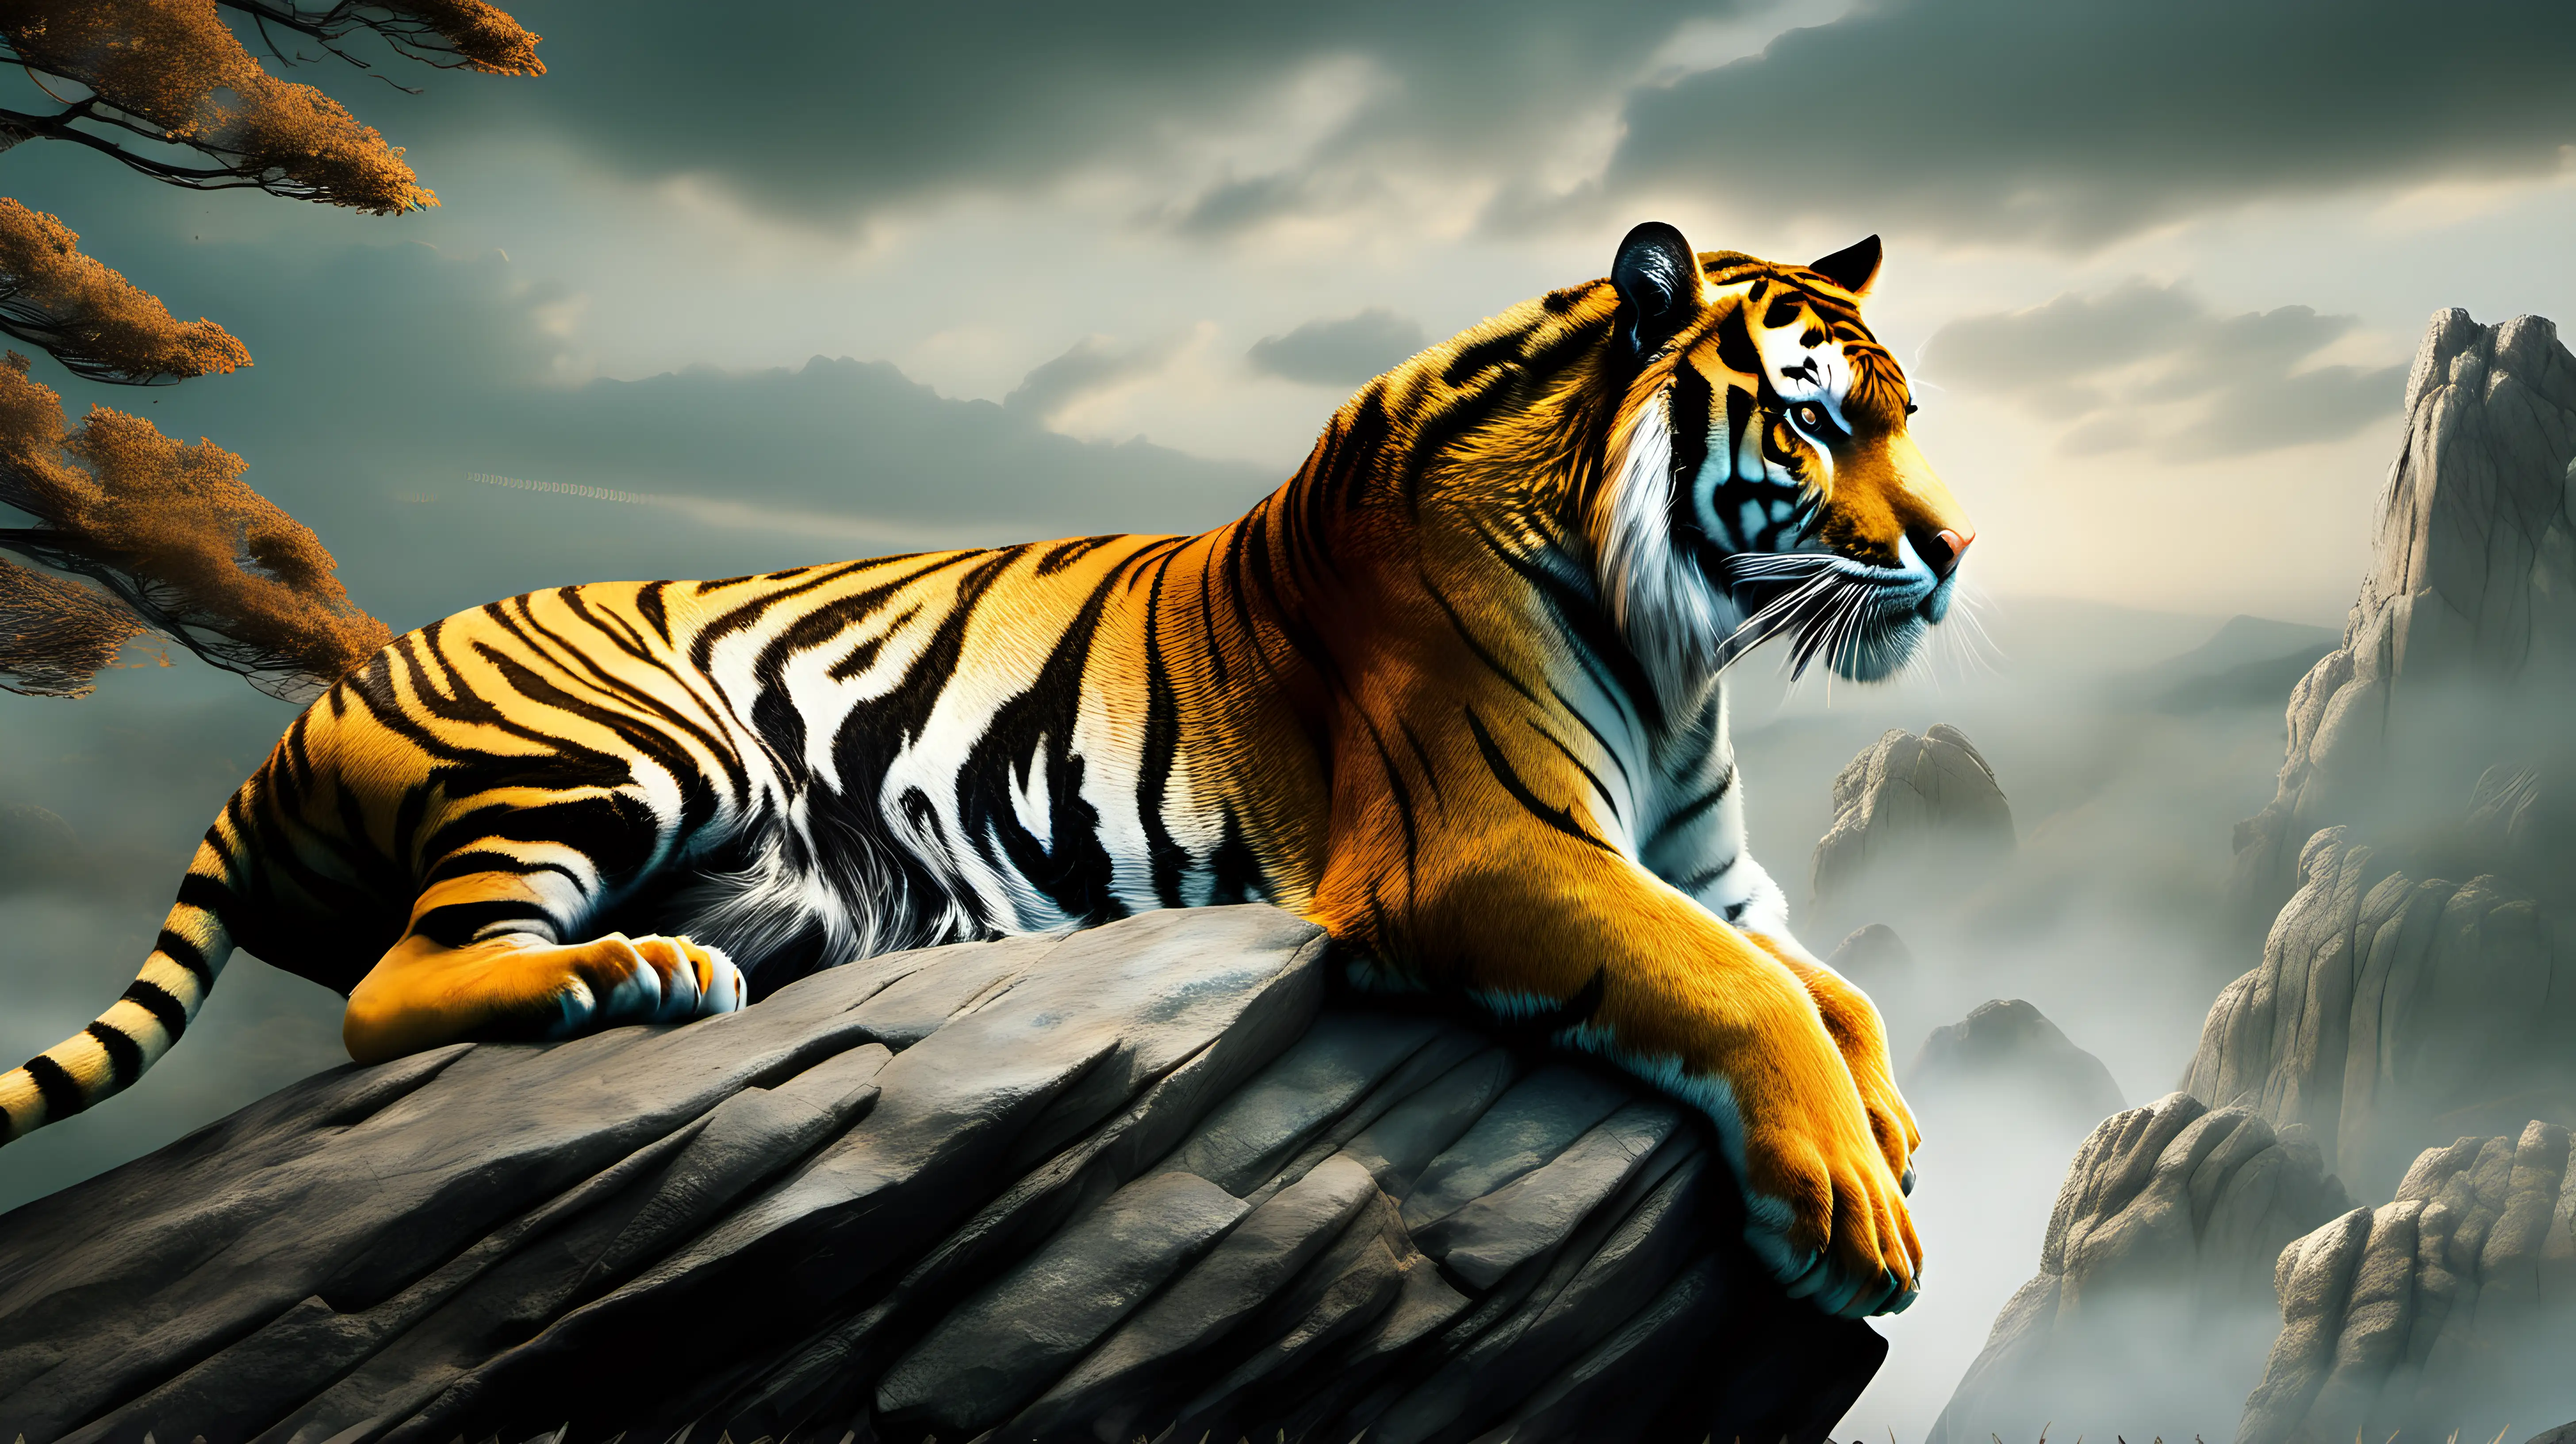 Design an image of a tiger perched atop a rocky outcrop, surveying its territory with a majestic demeanor, showcasing the untamed spirit of the wild